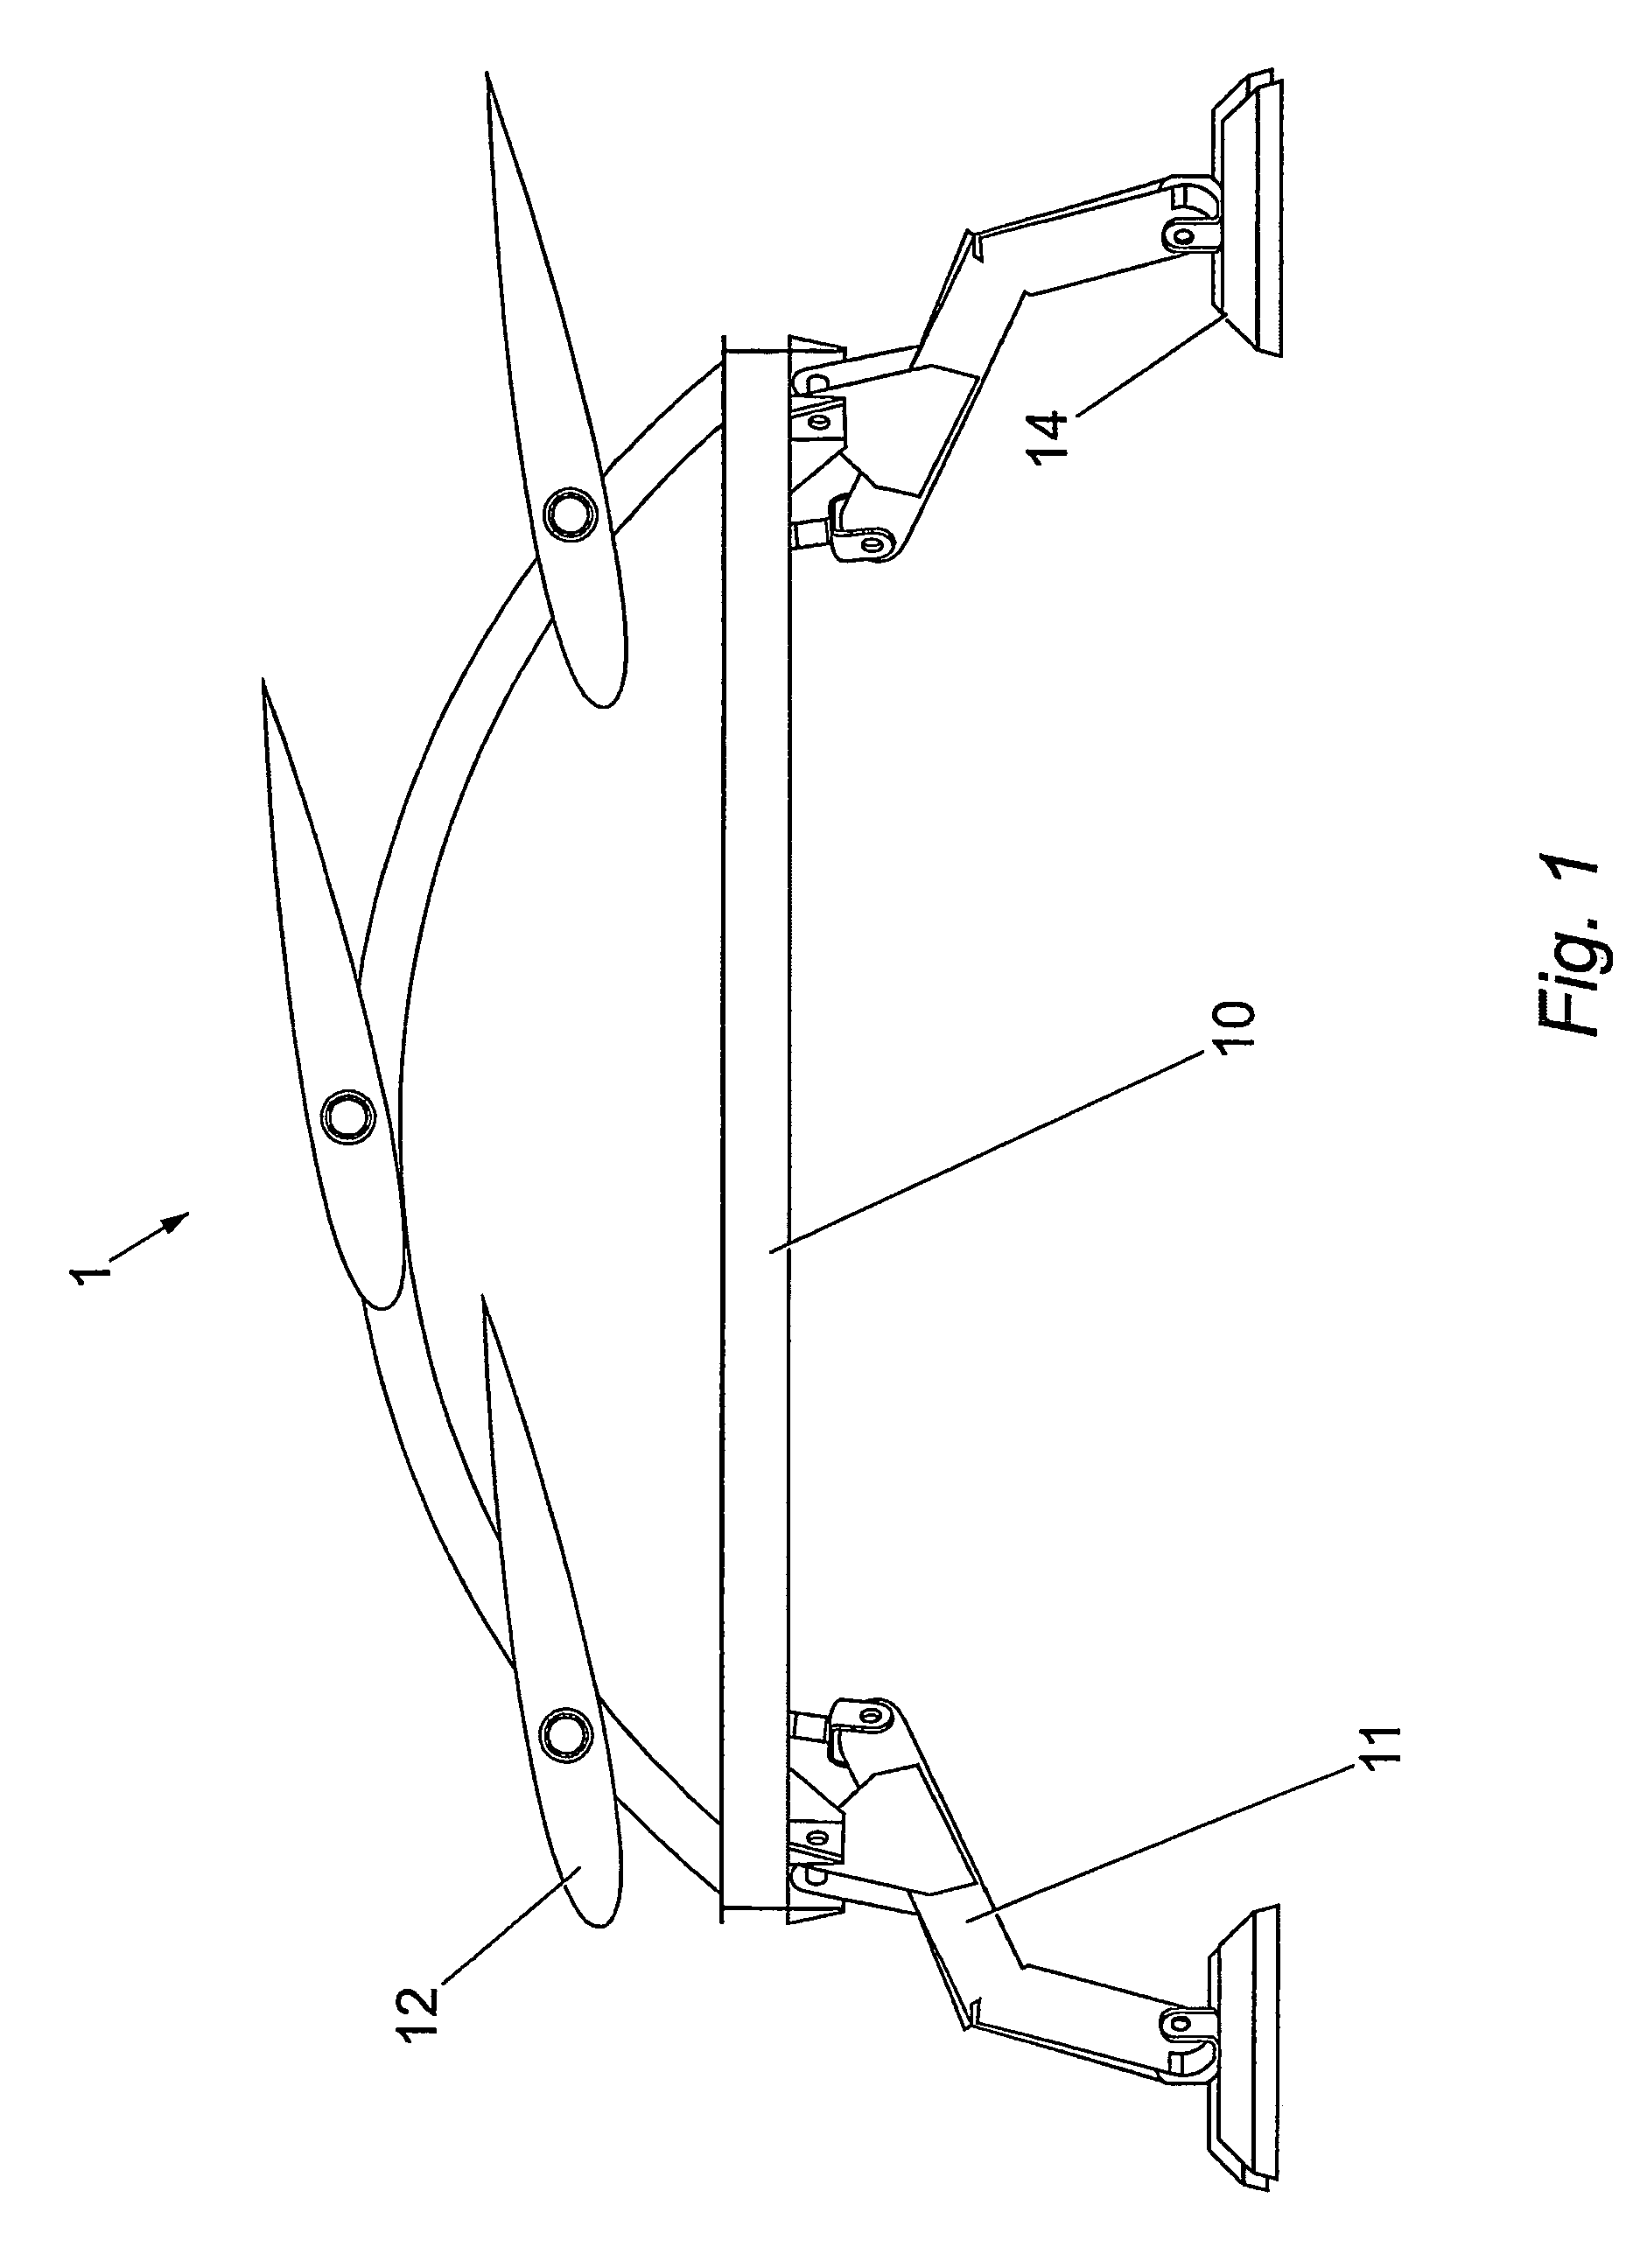 Apparatus for controlling underwater based equipment